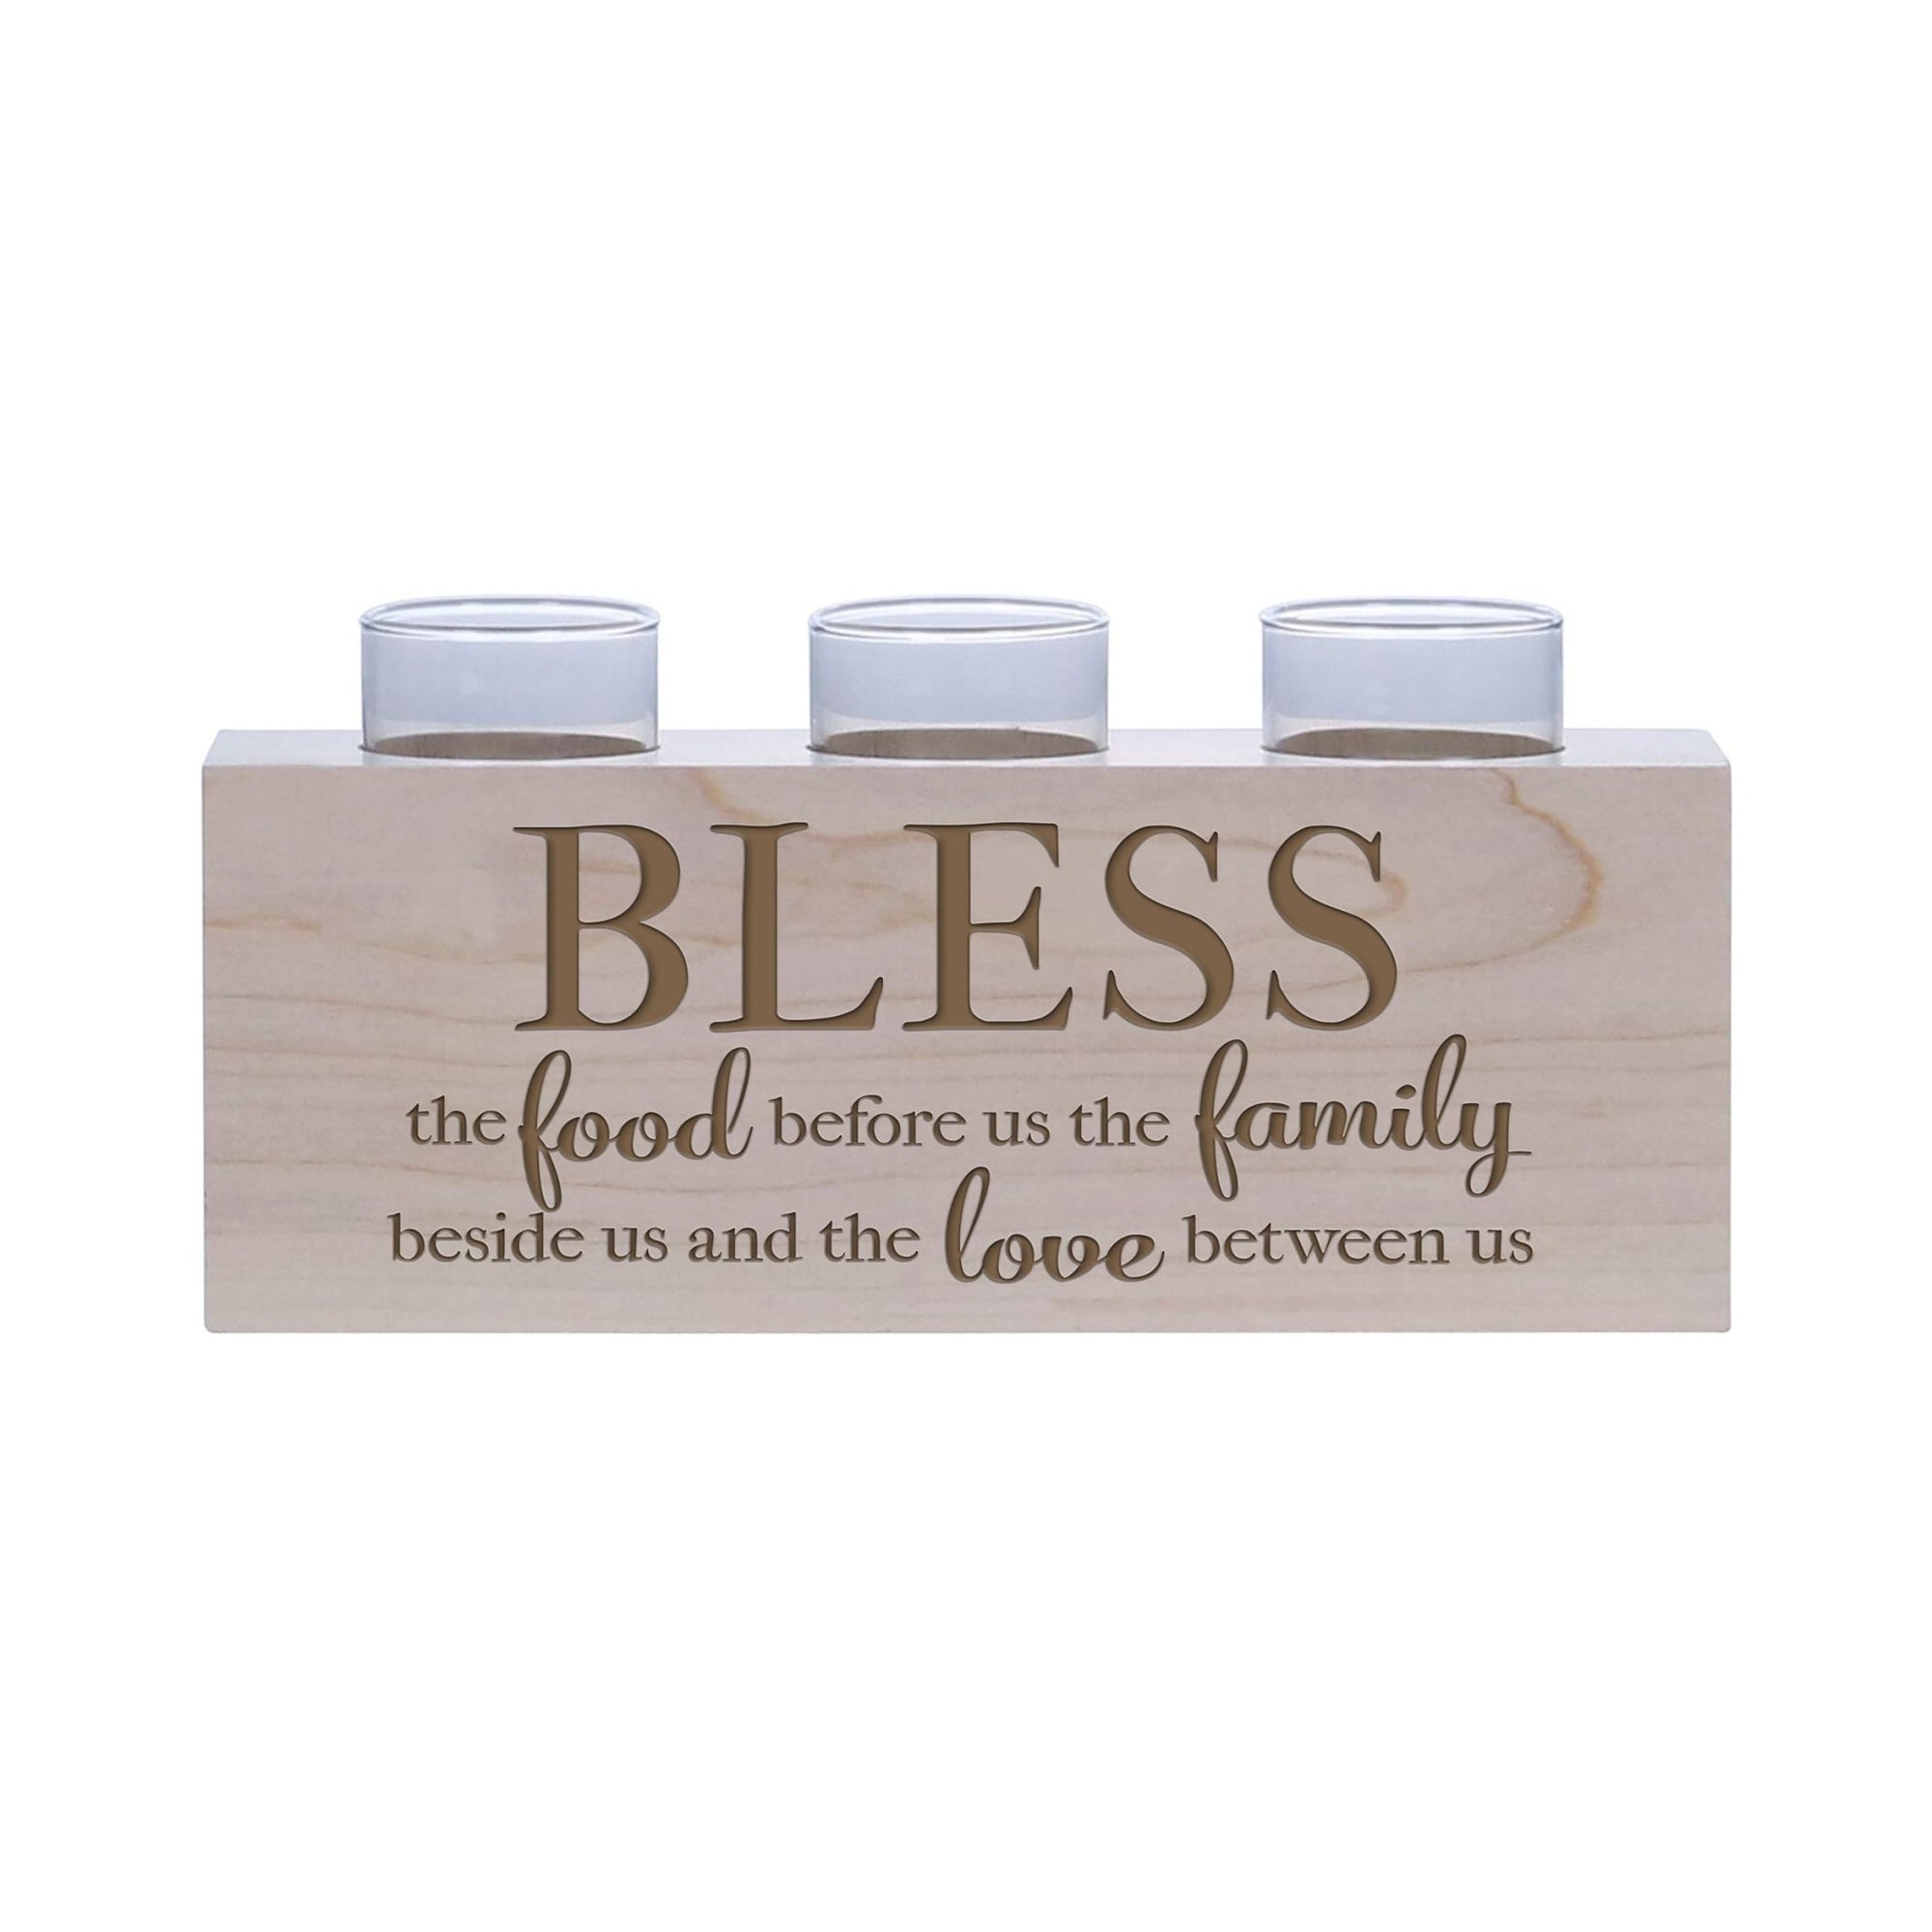 Personalized Engraved 3 Votive Candle Holder 10” x 4” x 4” - Bless The Food - LifeSong Milestones